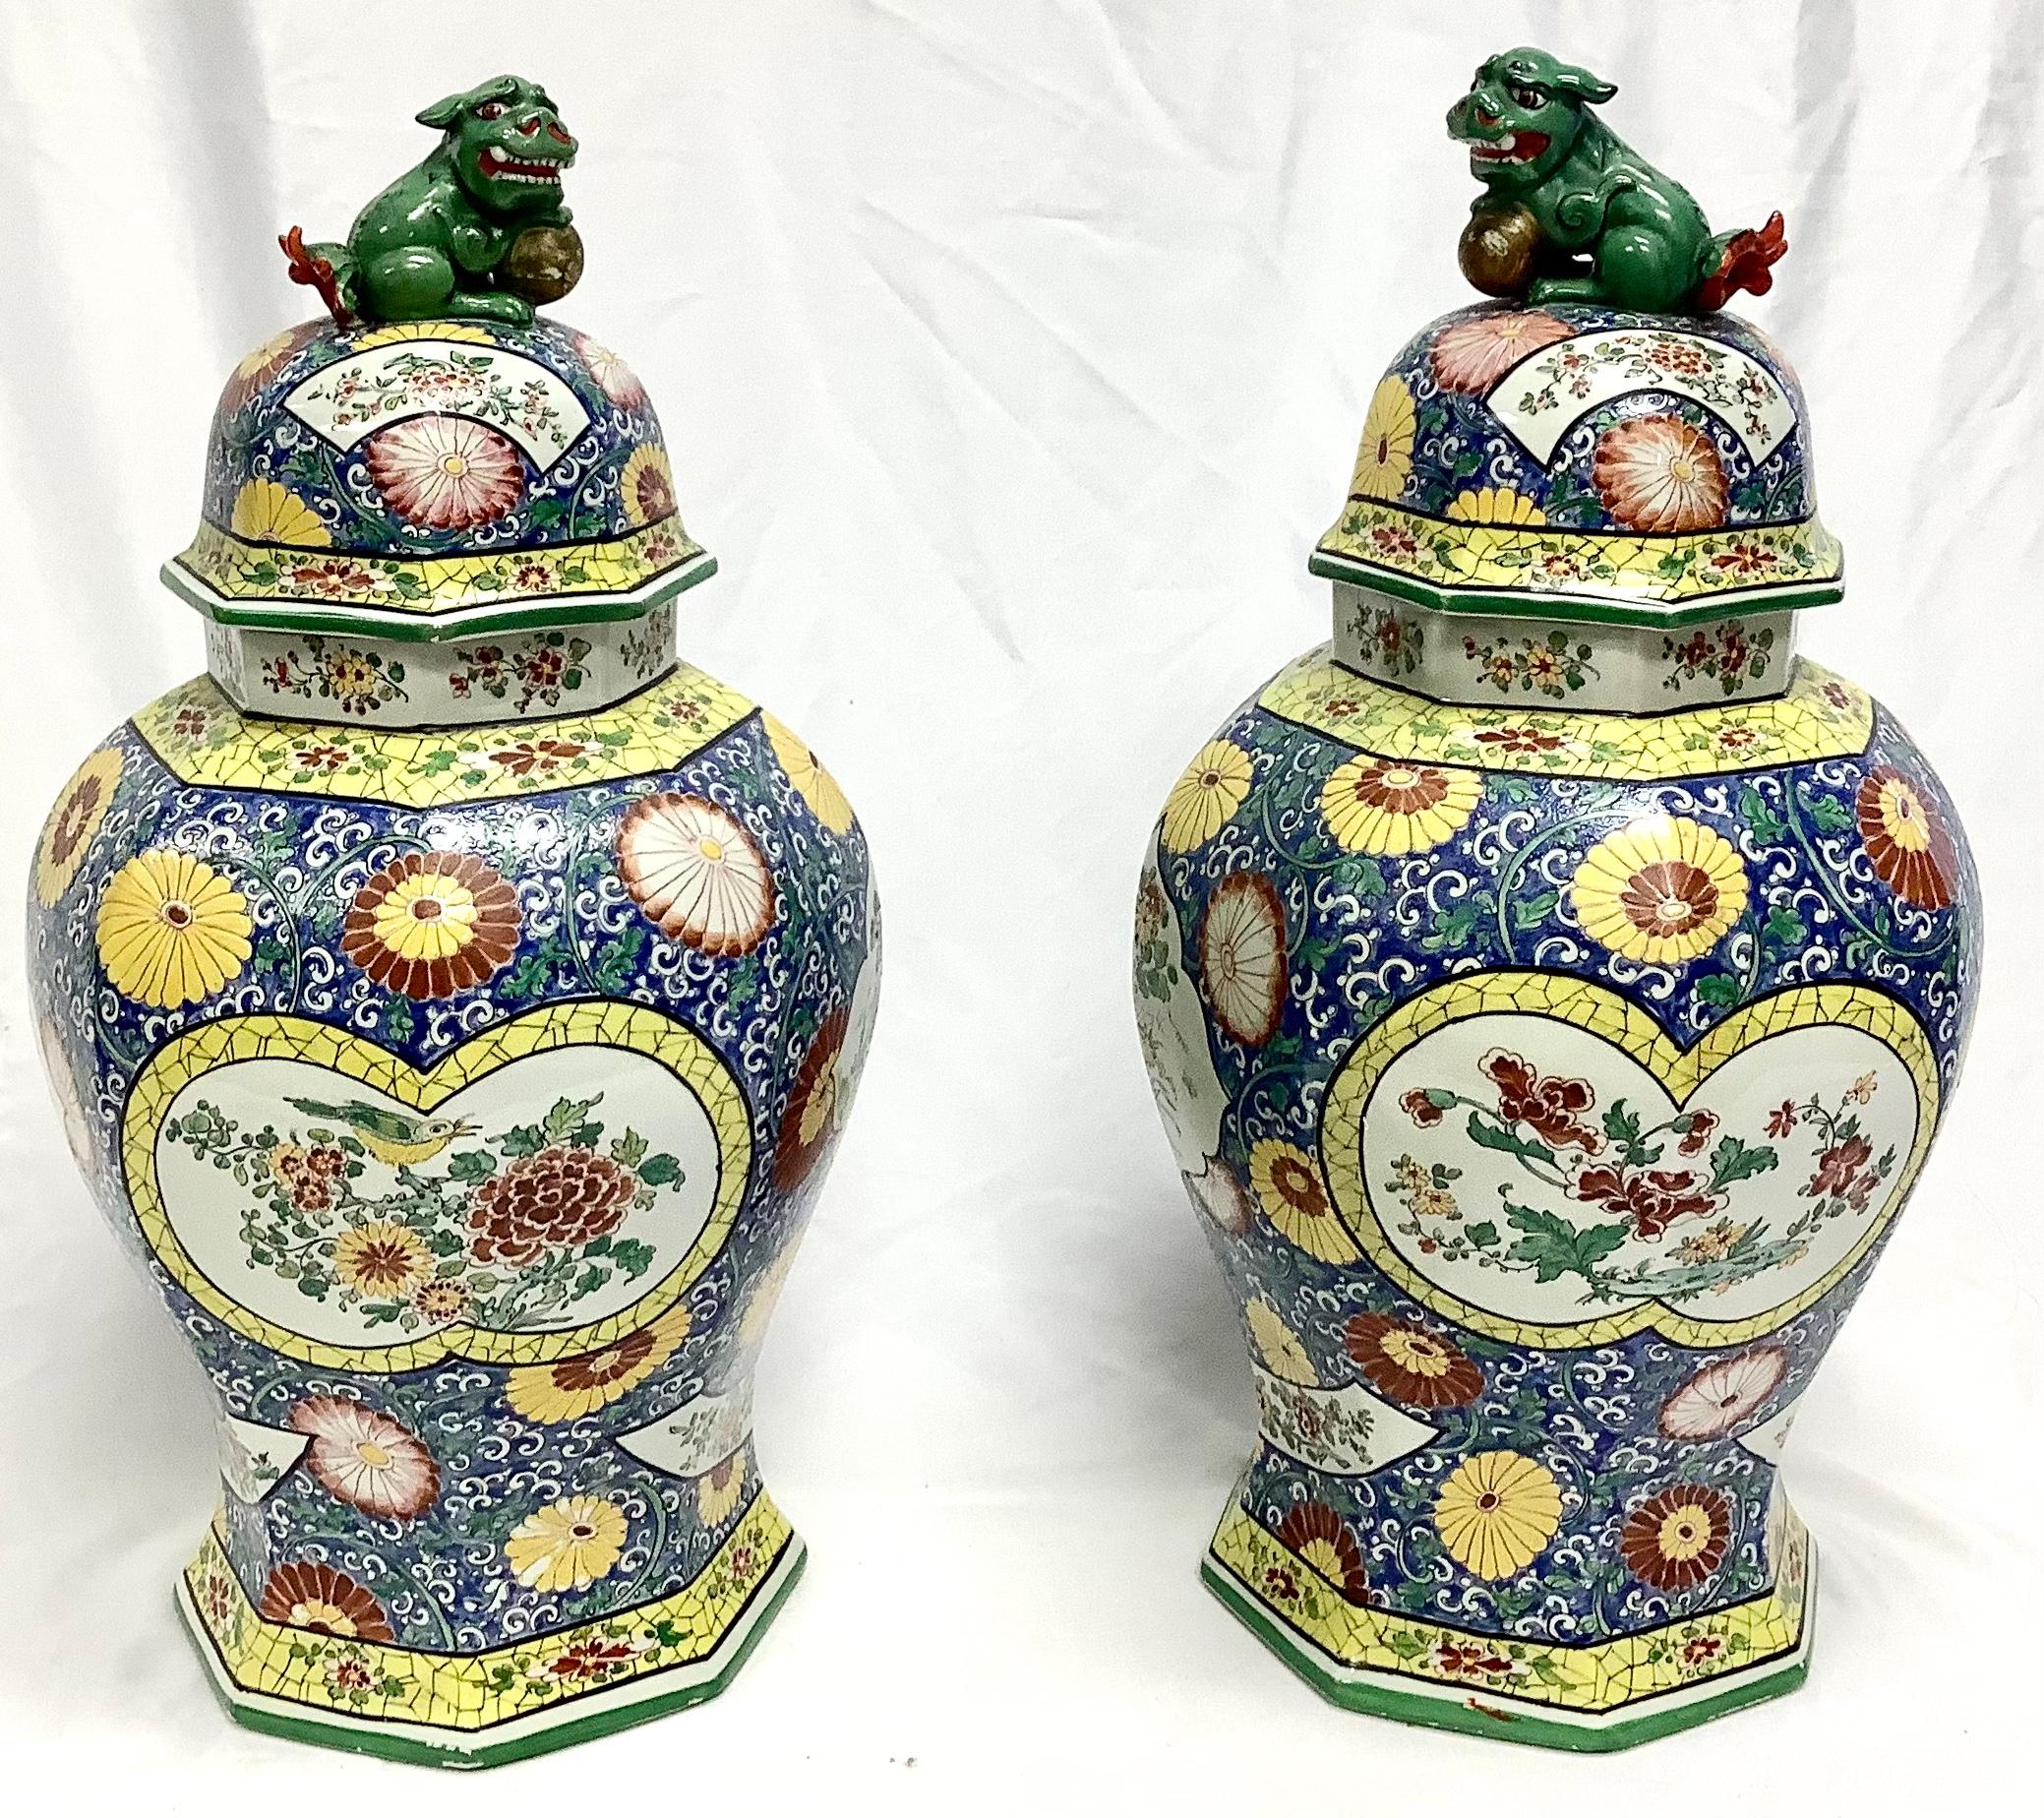 A very fine pair of Sampson style Chinese porcelain vases, blue background with multicolored floral and bird motif. Excellent quality workmanship, bright and vivid color throughout.